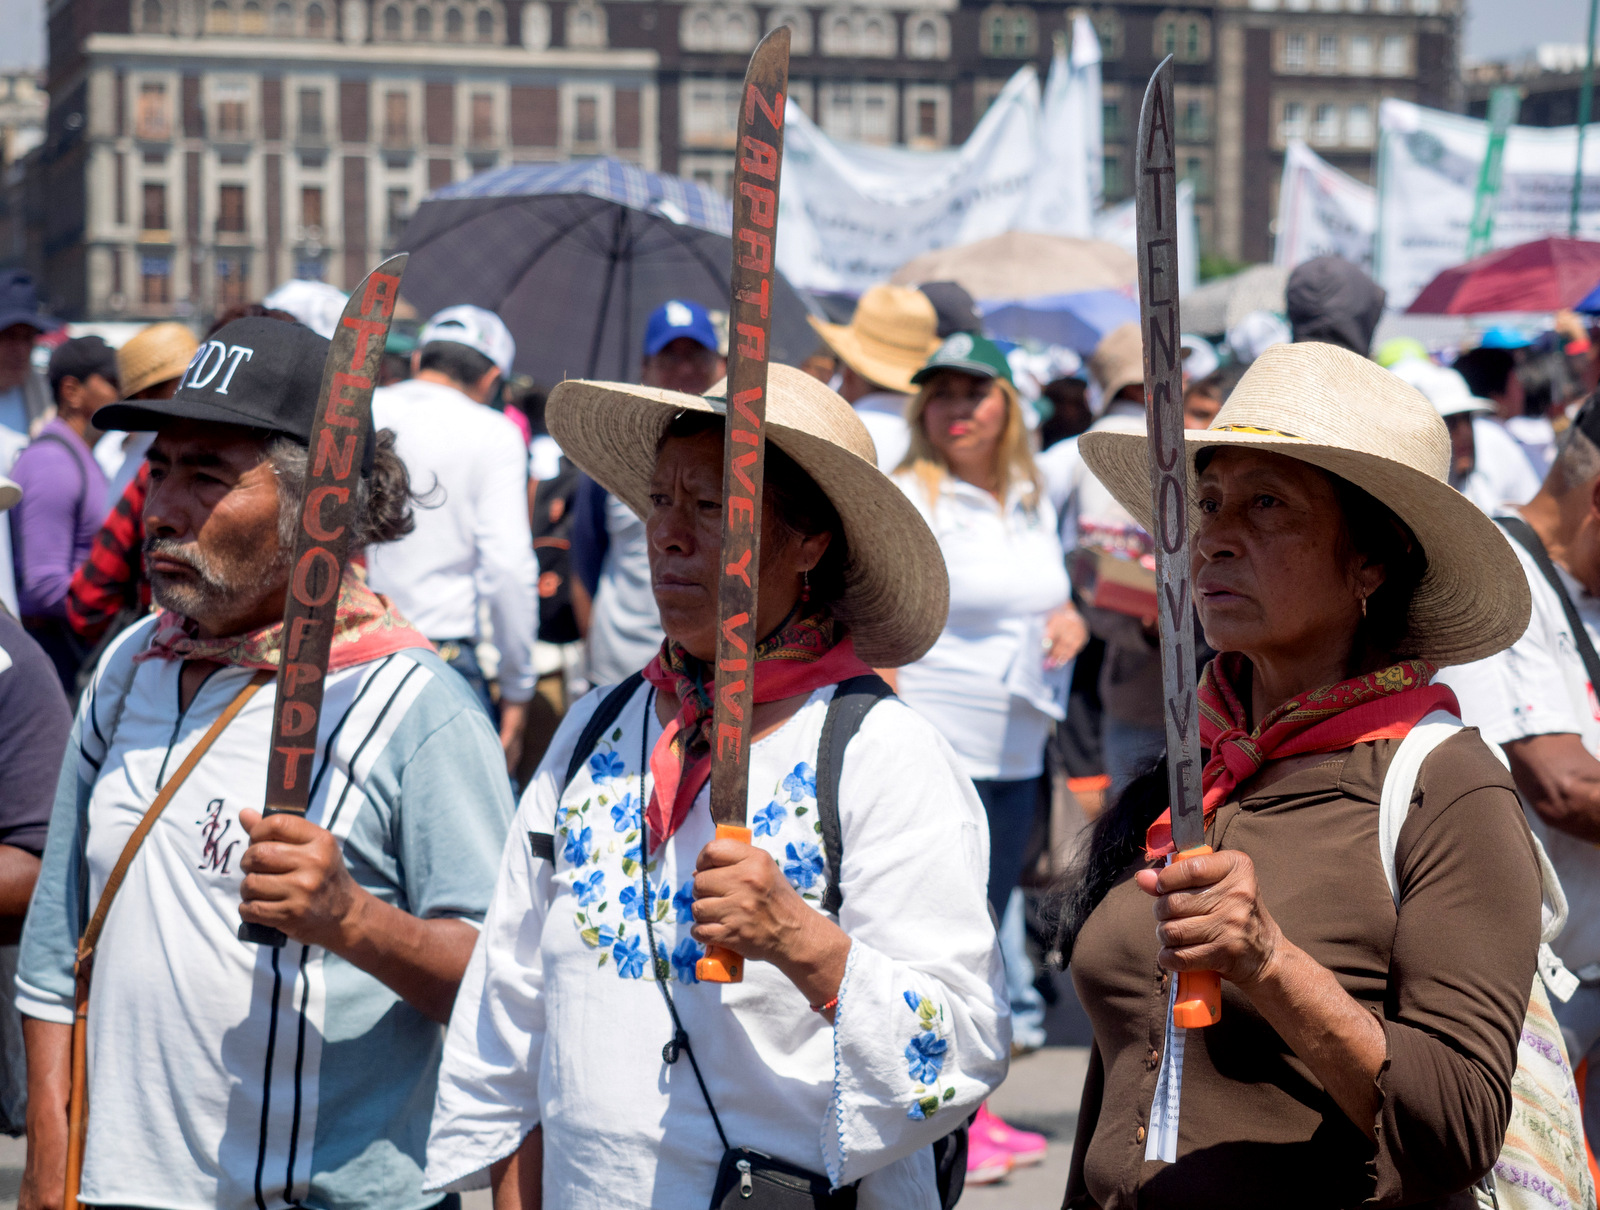 Land defenders from San Salvador Atenco, demonstrate to show their opposition to a new airport on their territory during a MayDay rally in Mexico City, May 1, 2018. (Photo: José Luis Granados Ceja)